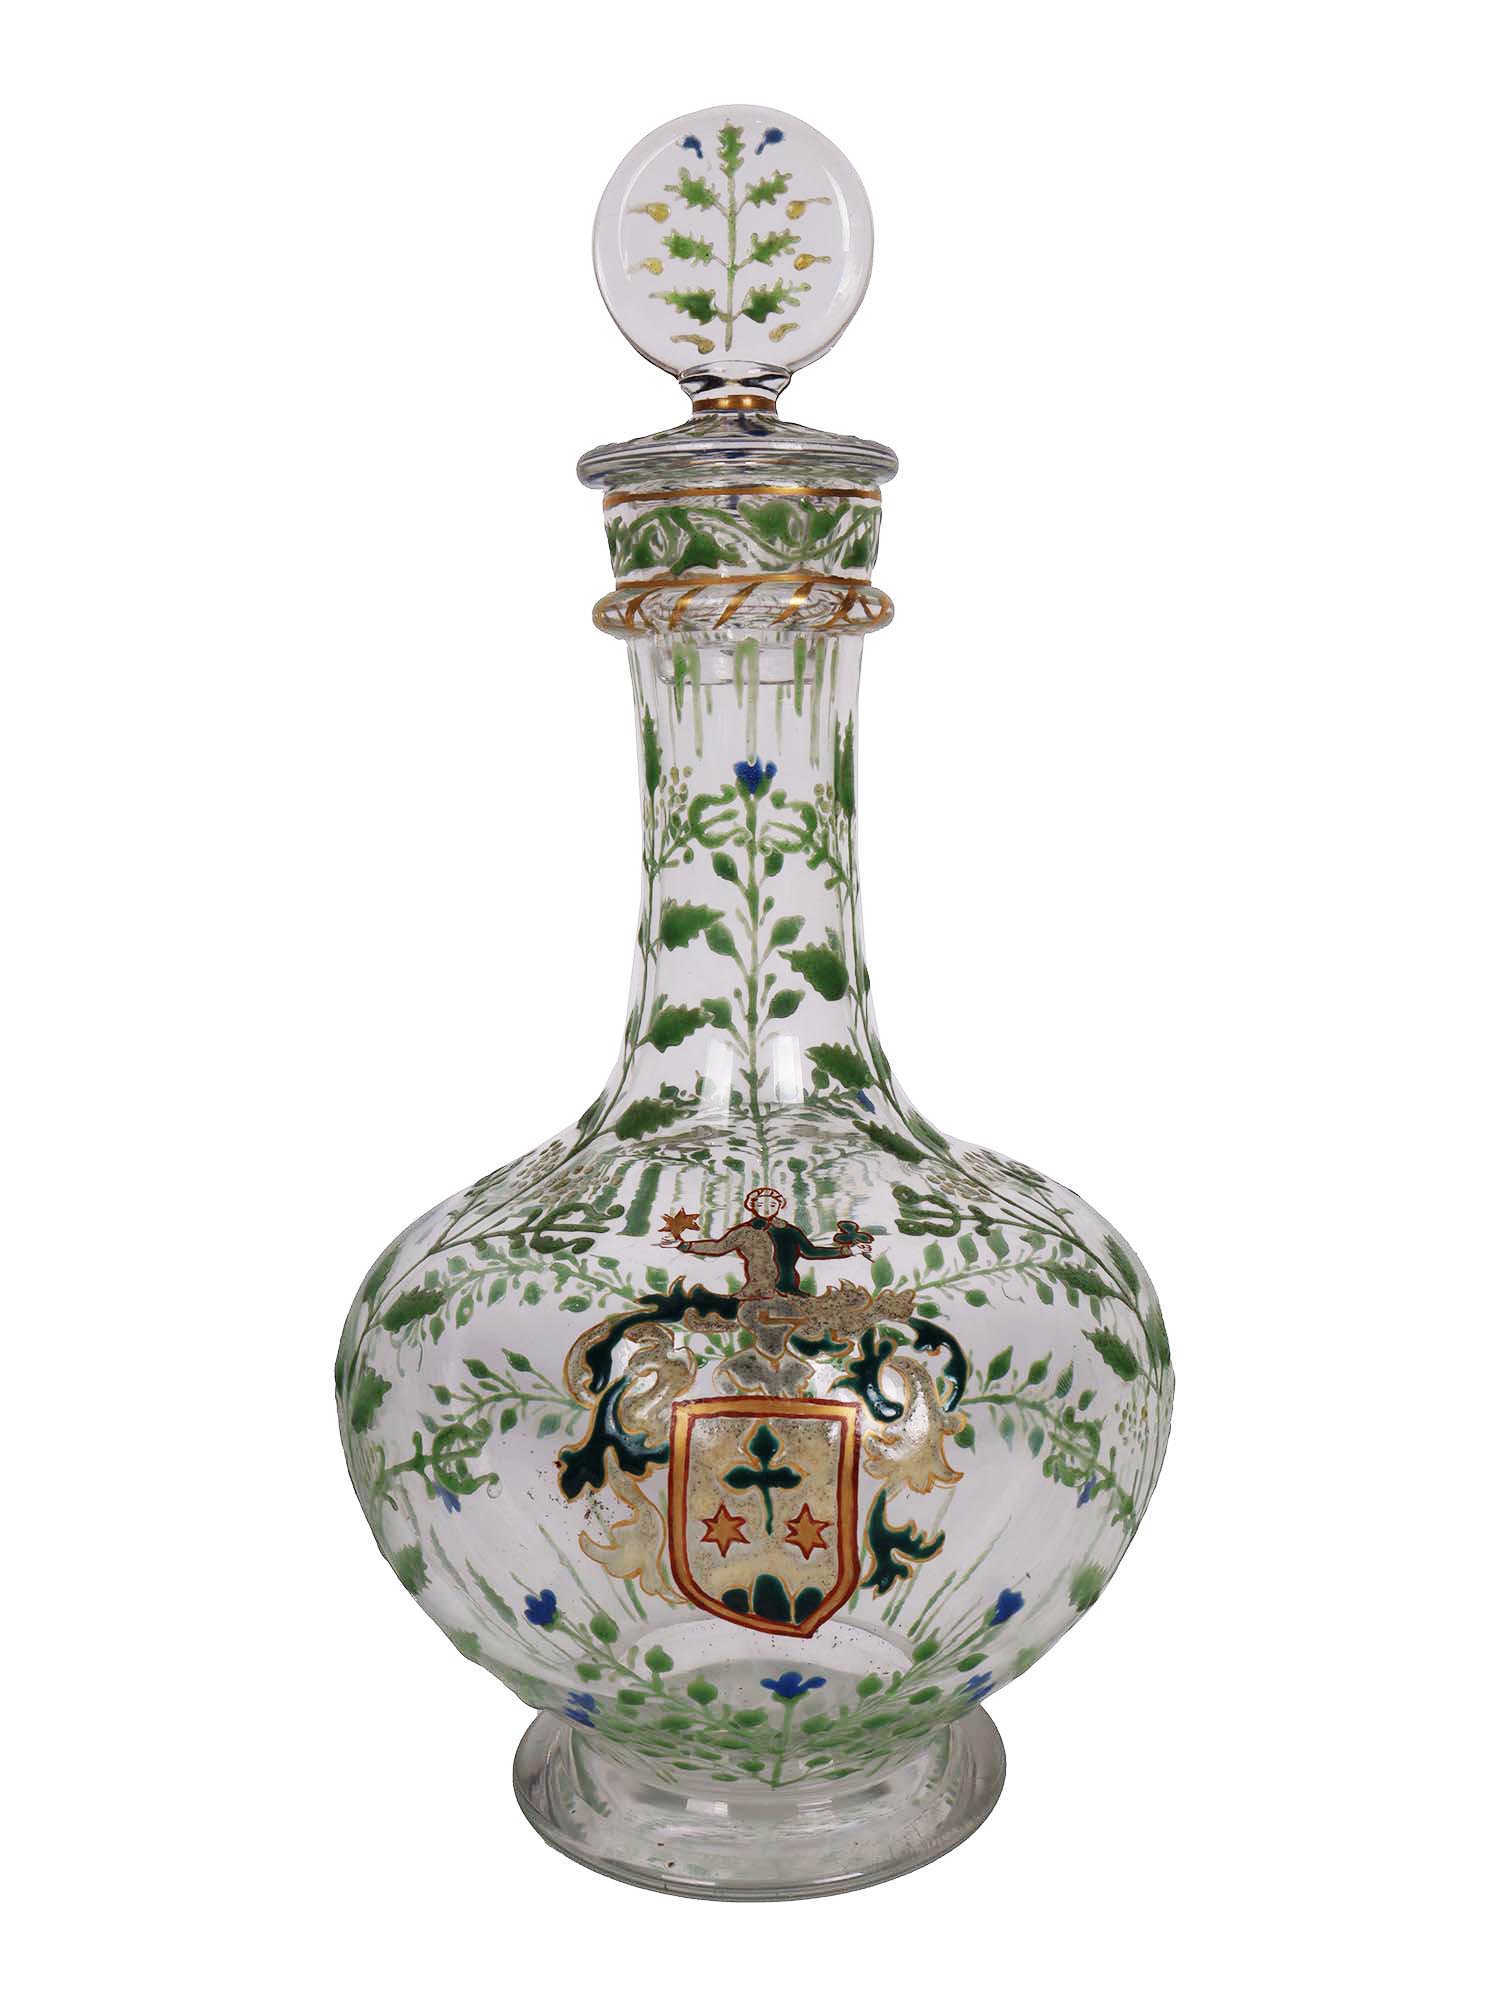 ANTIQUE FRENCH GLASS DECANTER, ATTR. EMILE GALLE PIC-0